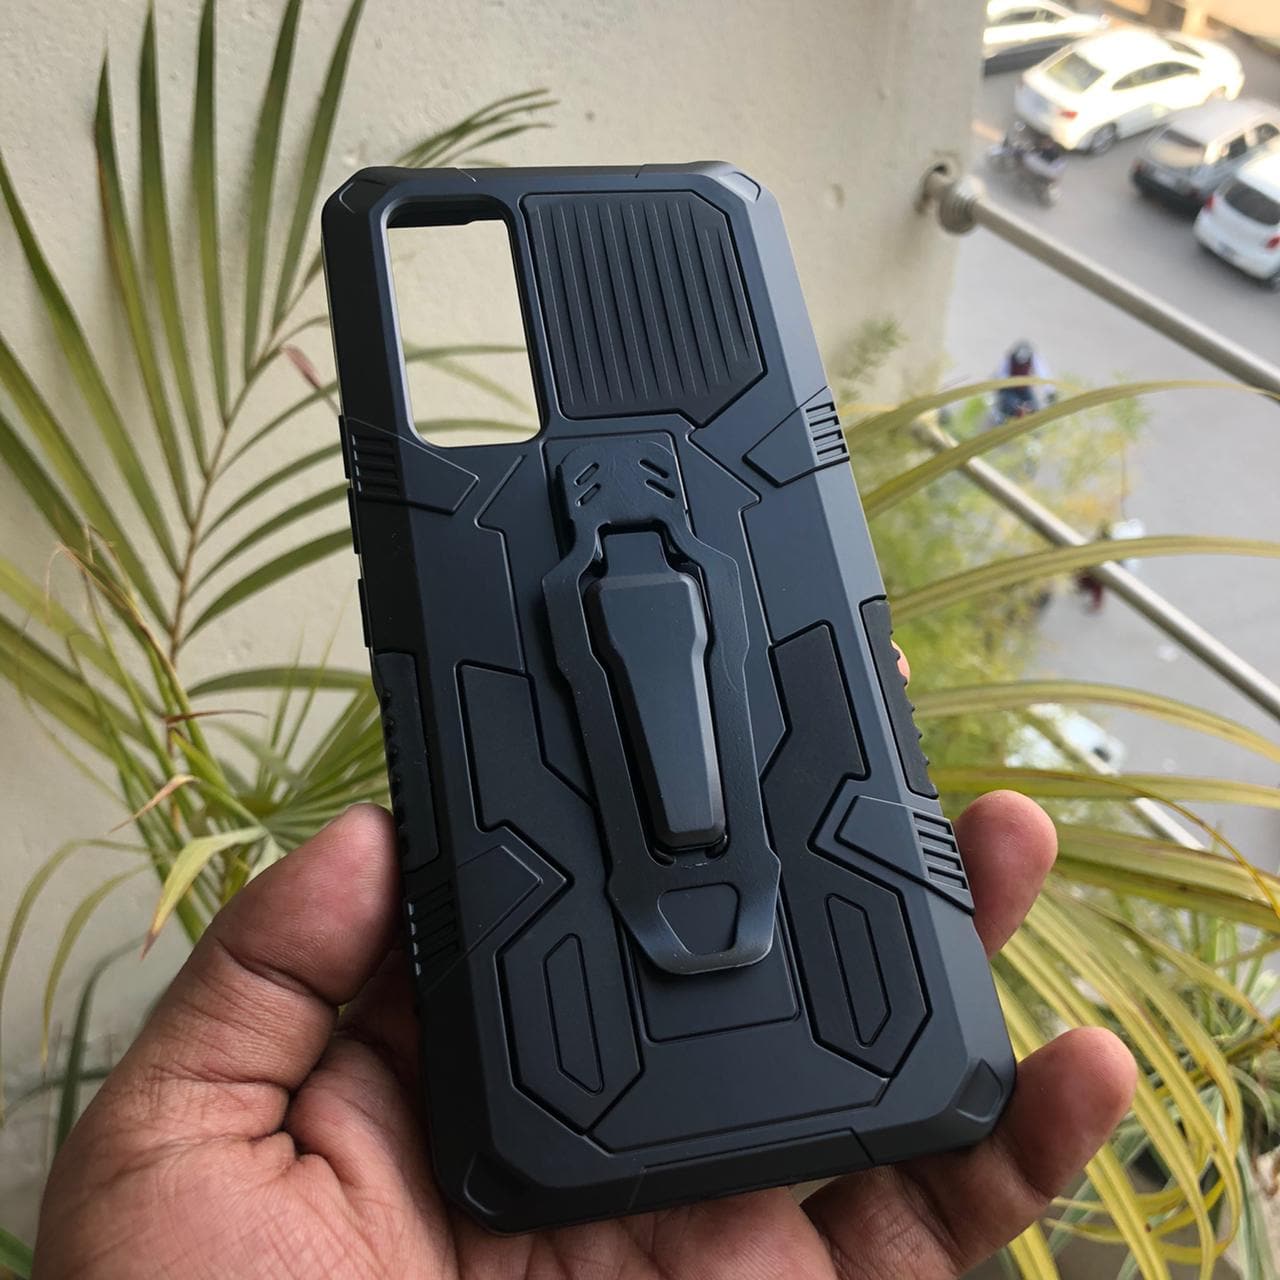 iCrystal Branded Military Army Grade Hybrid shock Proof Case For All Vivo Models